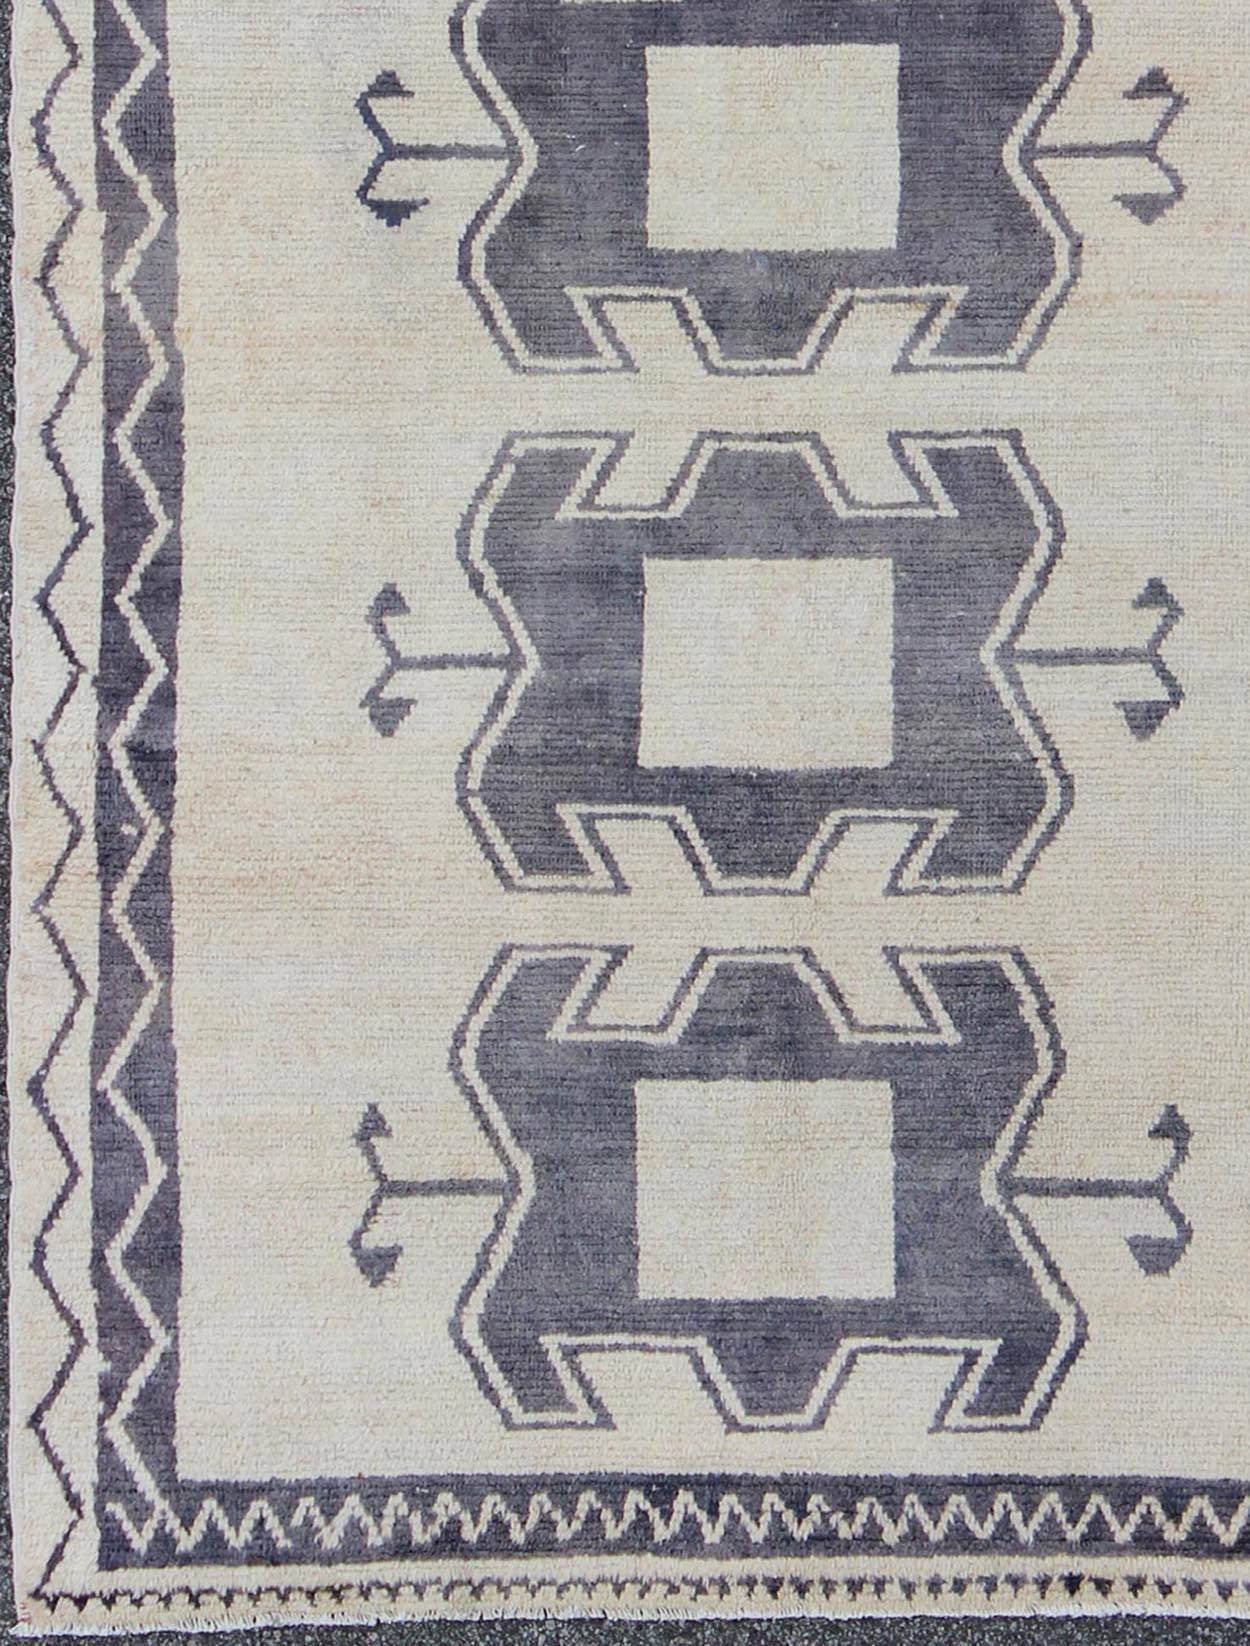 Measures: 4'11 x 9'8

Turkish Tulu rug with tribal medallion design and cream in deep Purple/Gray and ivory. Tribal design Tulu rug with tribal design. 
Keivan Woven Arts/ Rug/EN-141883, country of origin / type: Turkey / Tulu, circa 1950.

This